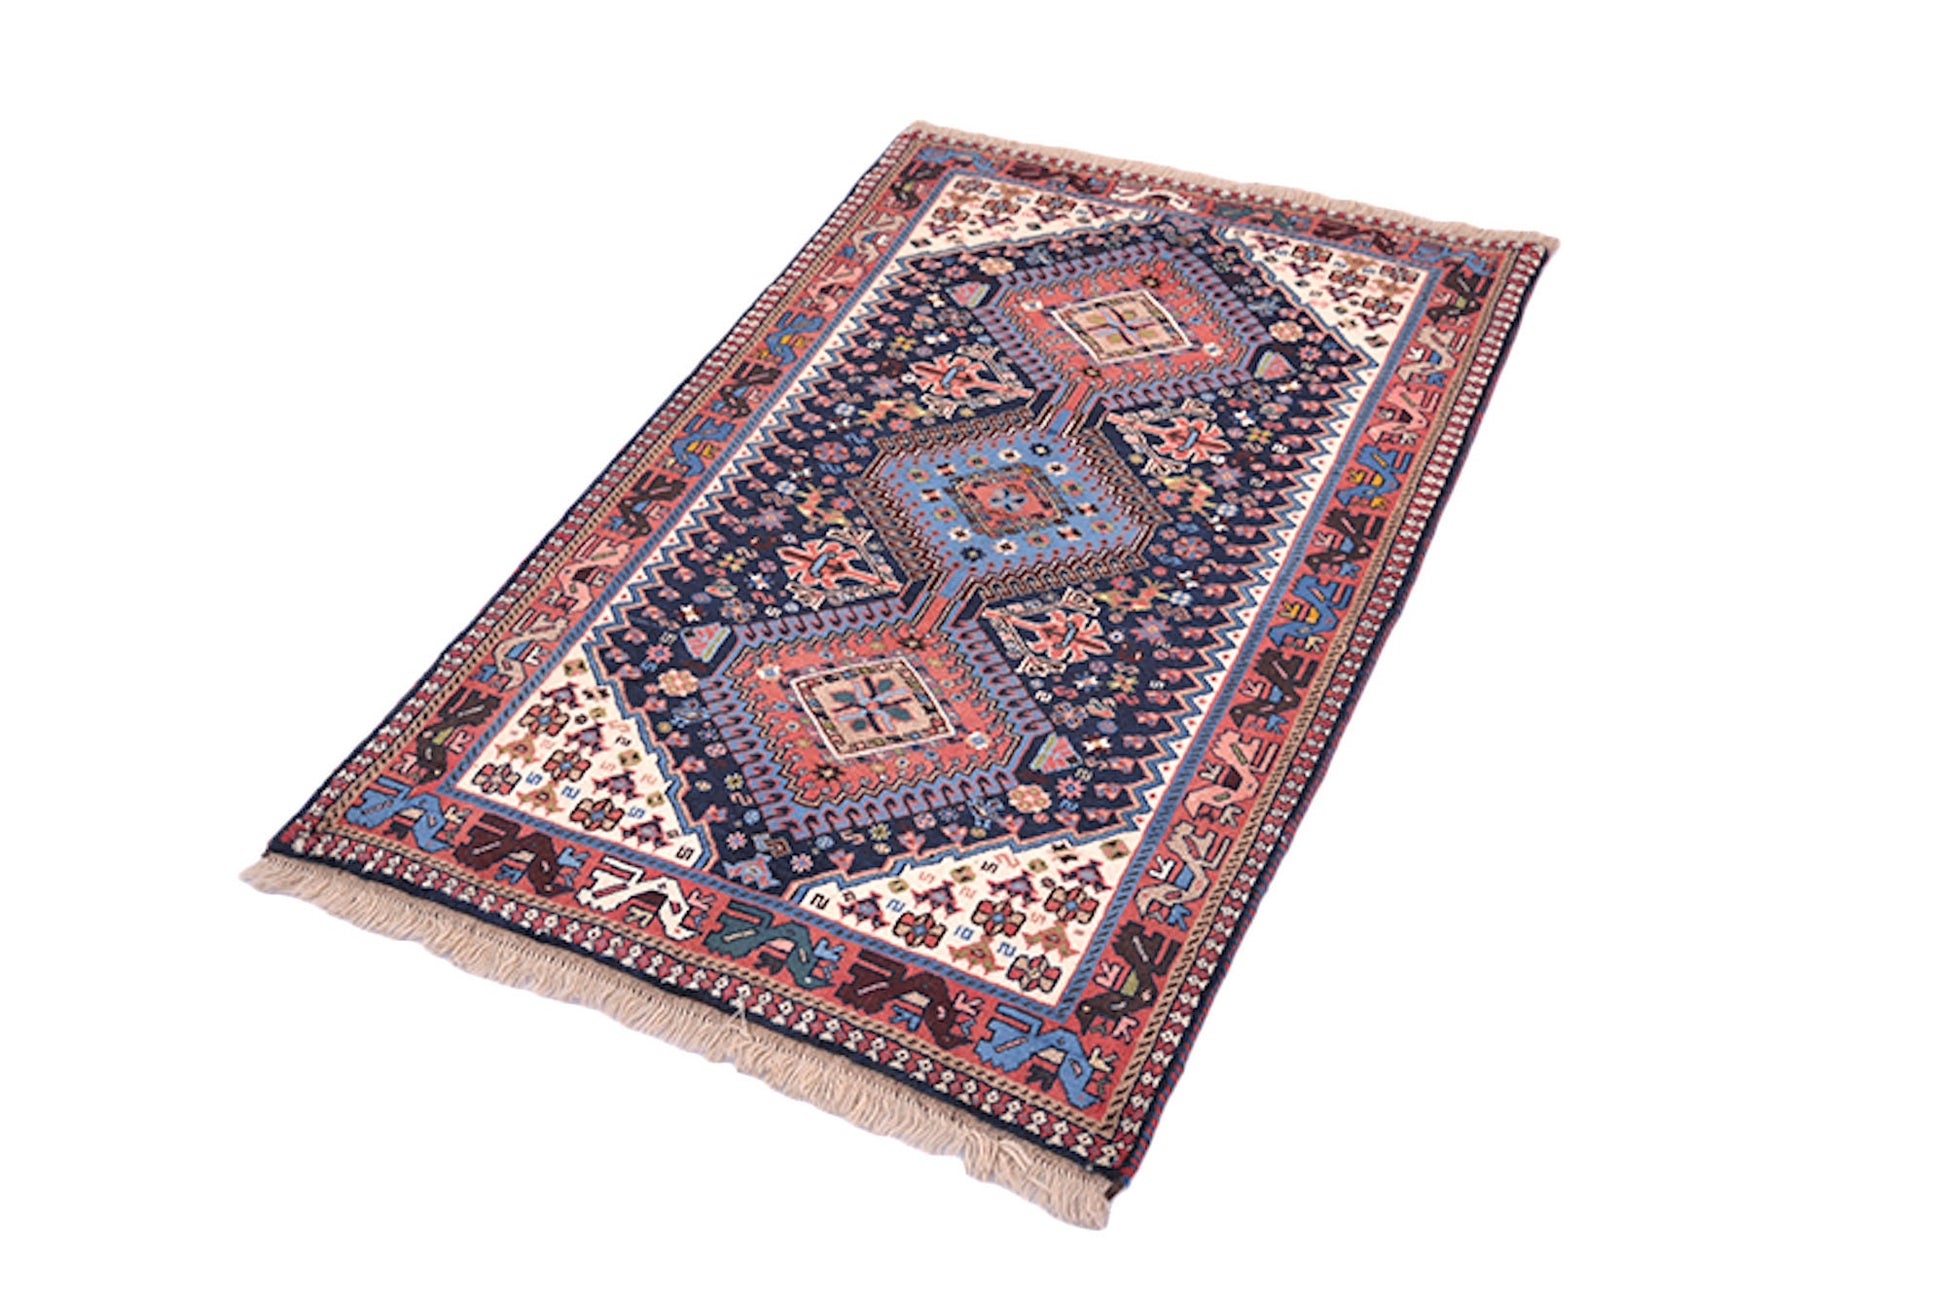 Navy Blue Handmade Area Rug with Geometric Tribal Medallion Design | Pink and Colorful Details | Wool